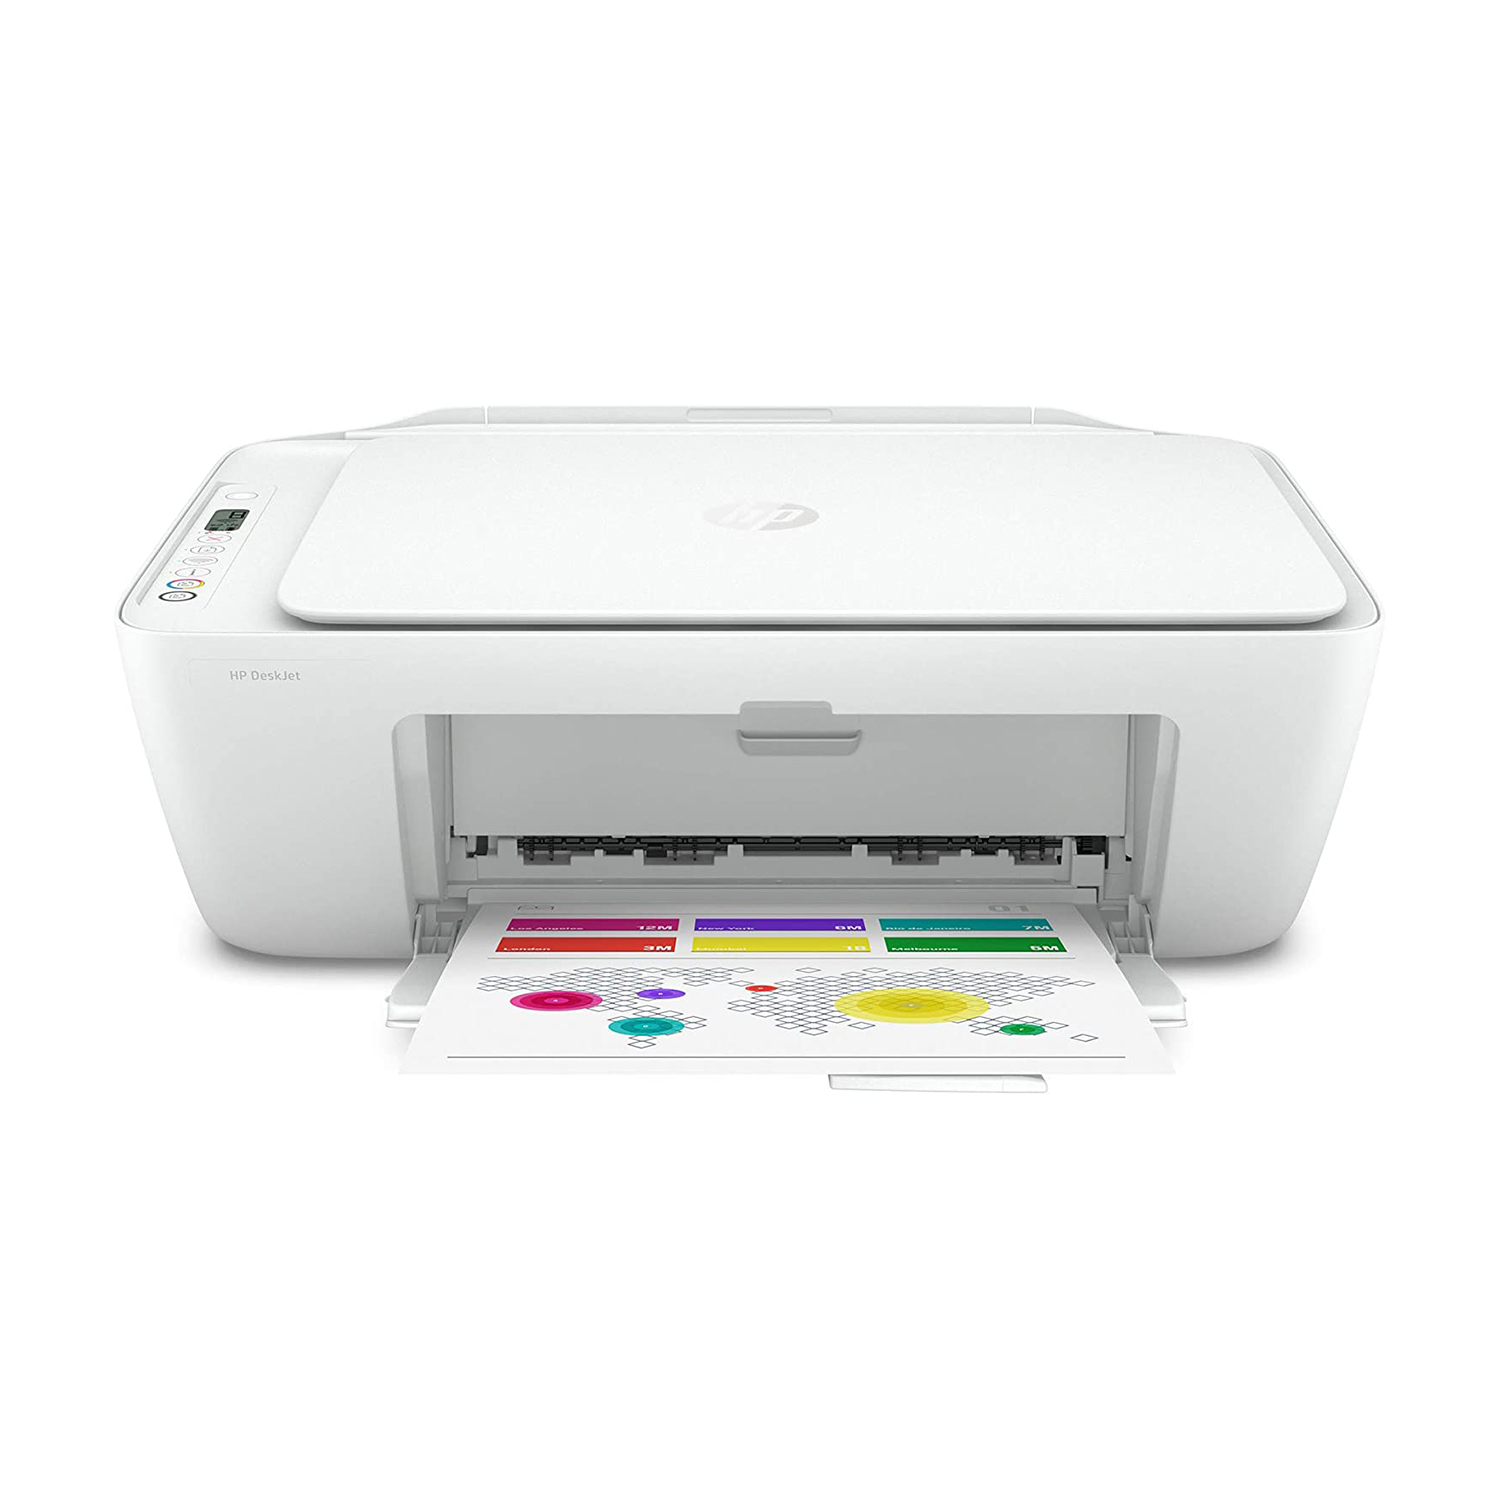 fejl acceptabel Antagonisme HP DeskJet Series Wireless All-in-One Color Inkjet Printer – Print, Scan,  Copy for Home Business Office – Icon LCD Display, Instant Ink Ready, Up to  1200 x 1200 dpi, Bluetooth 4.1, WiFi, USB – Everestonline